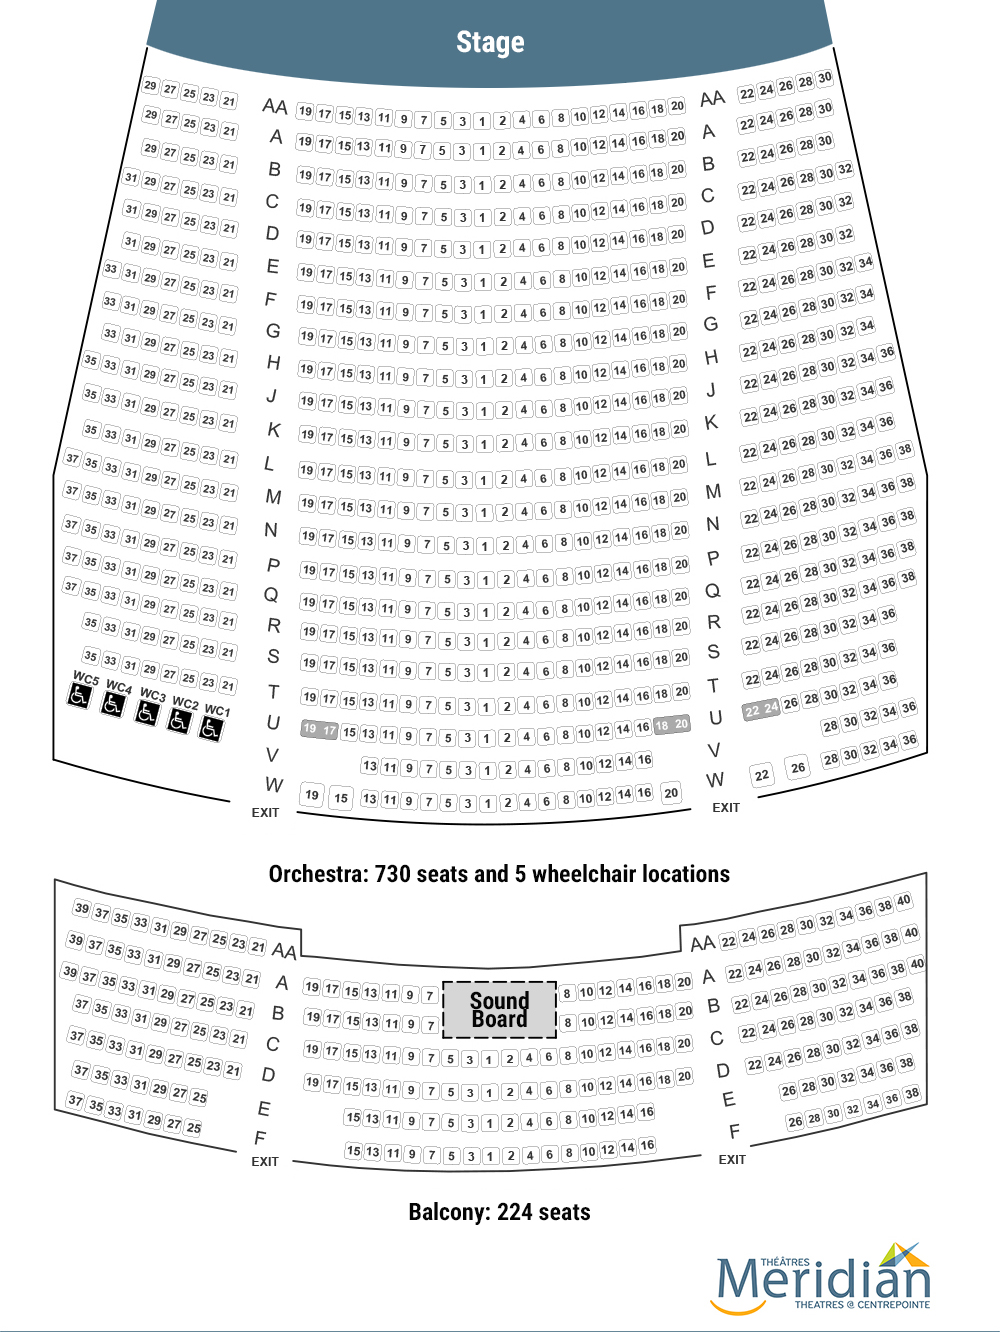 Mainstage Theatre Seating Plan